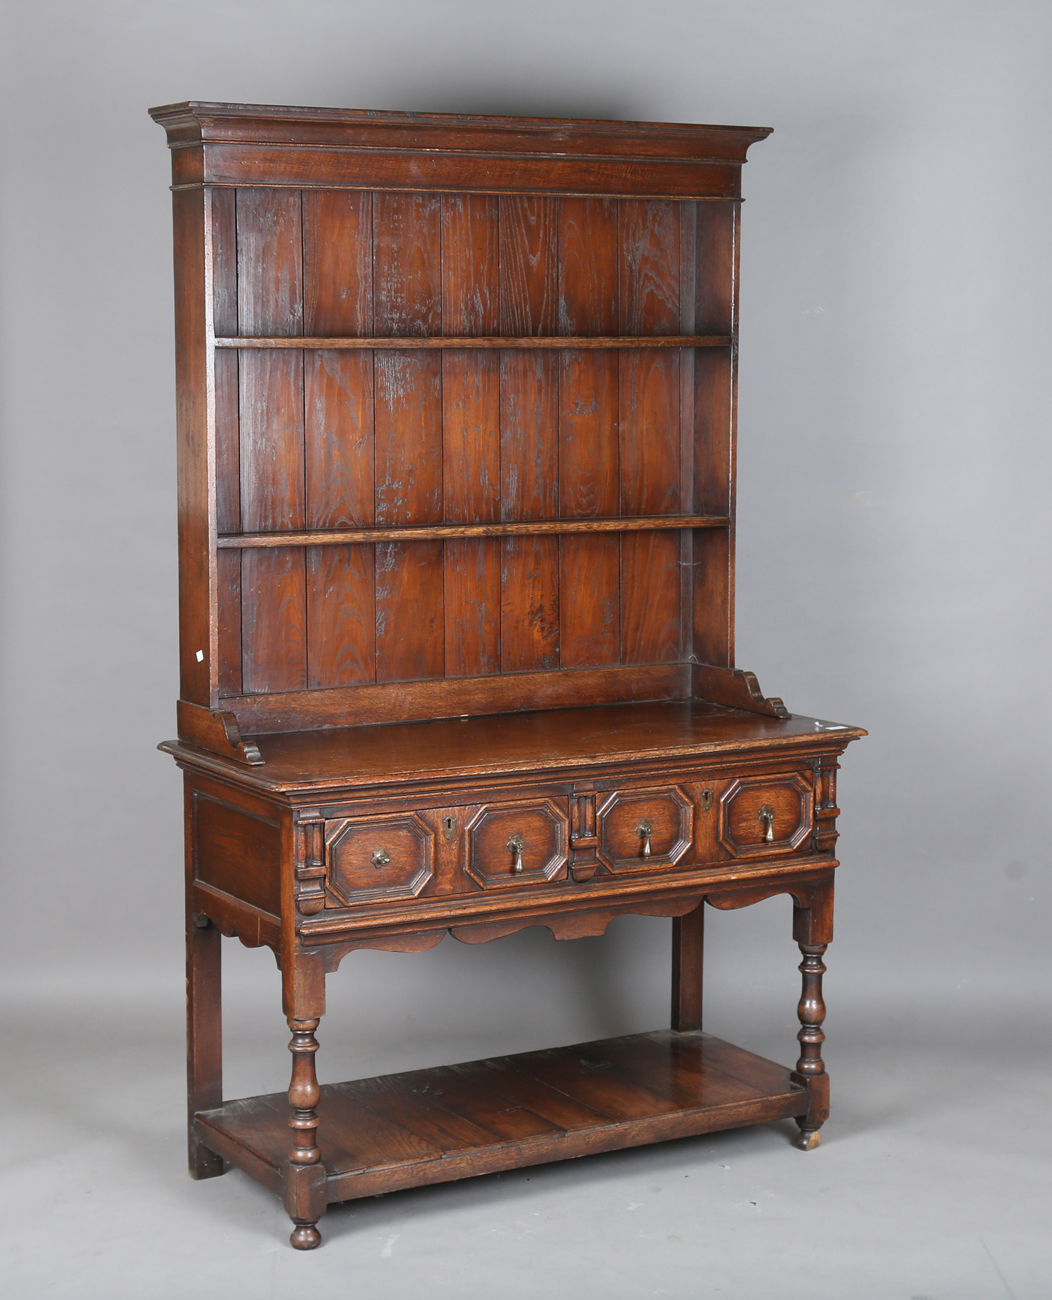 A 20th century William and Mary style oak dresser, the two drawers with applied geometric mouldings,